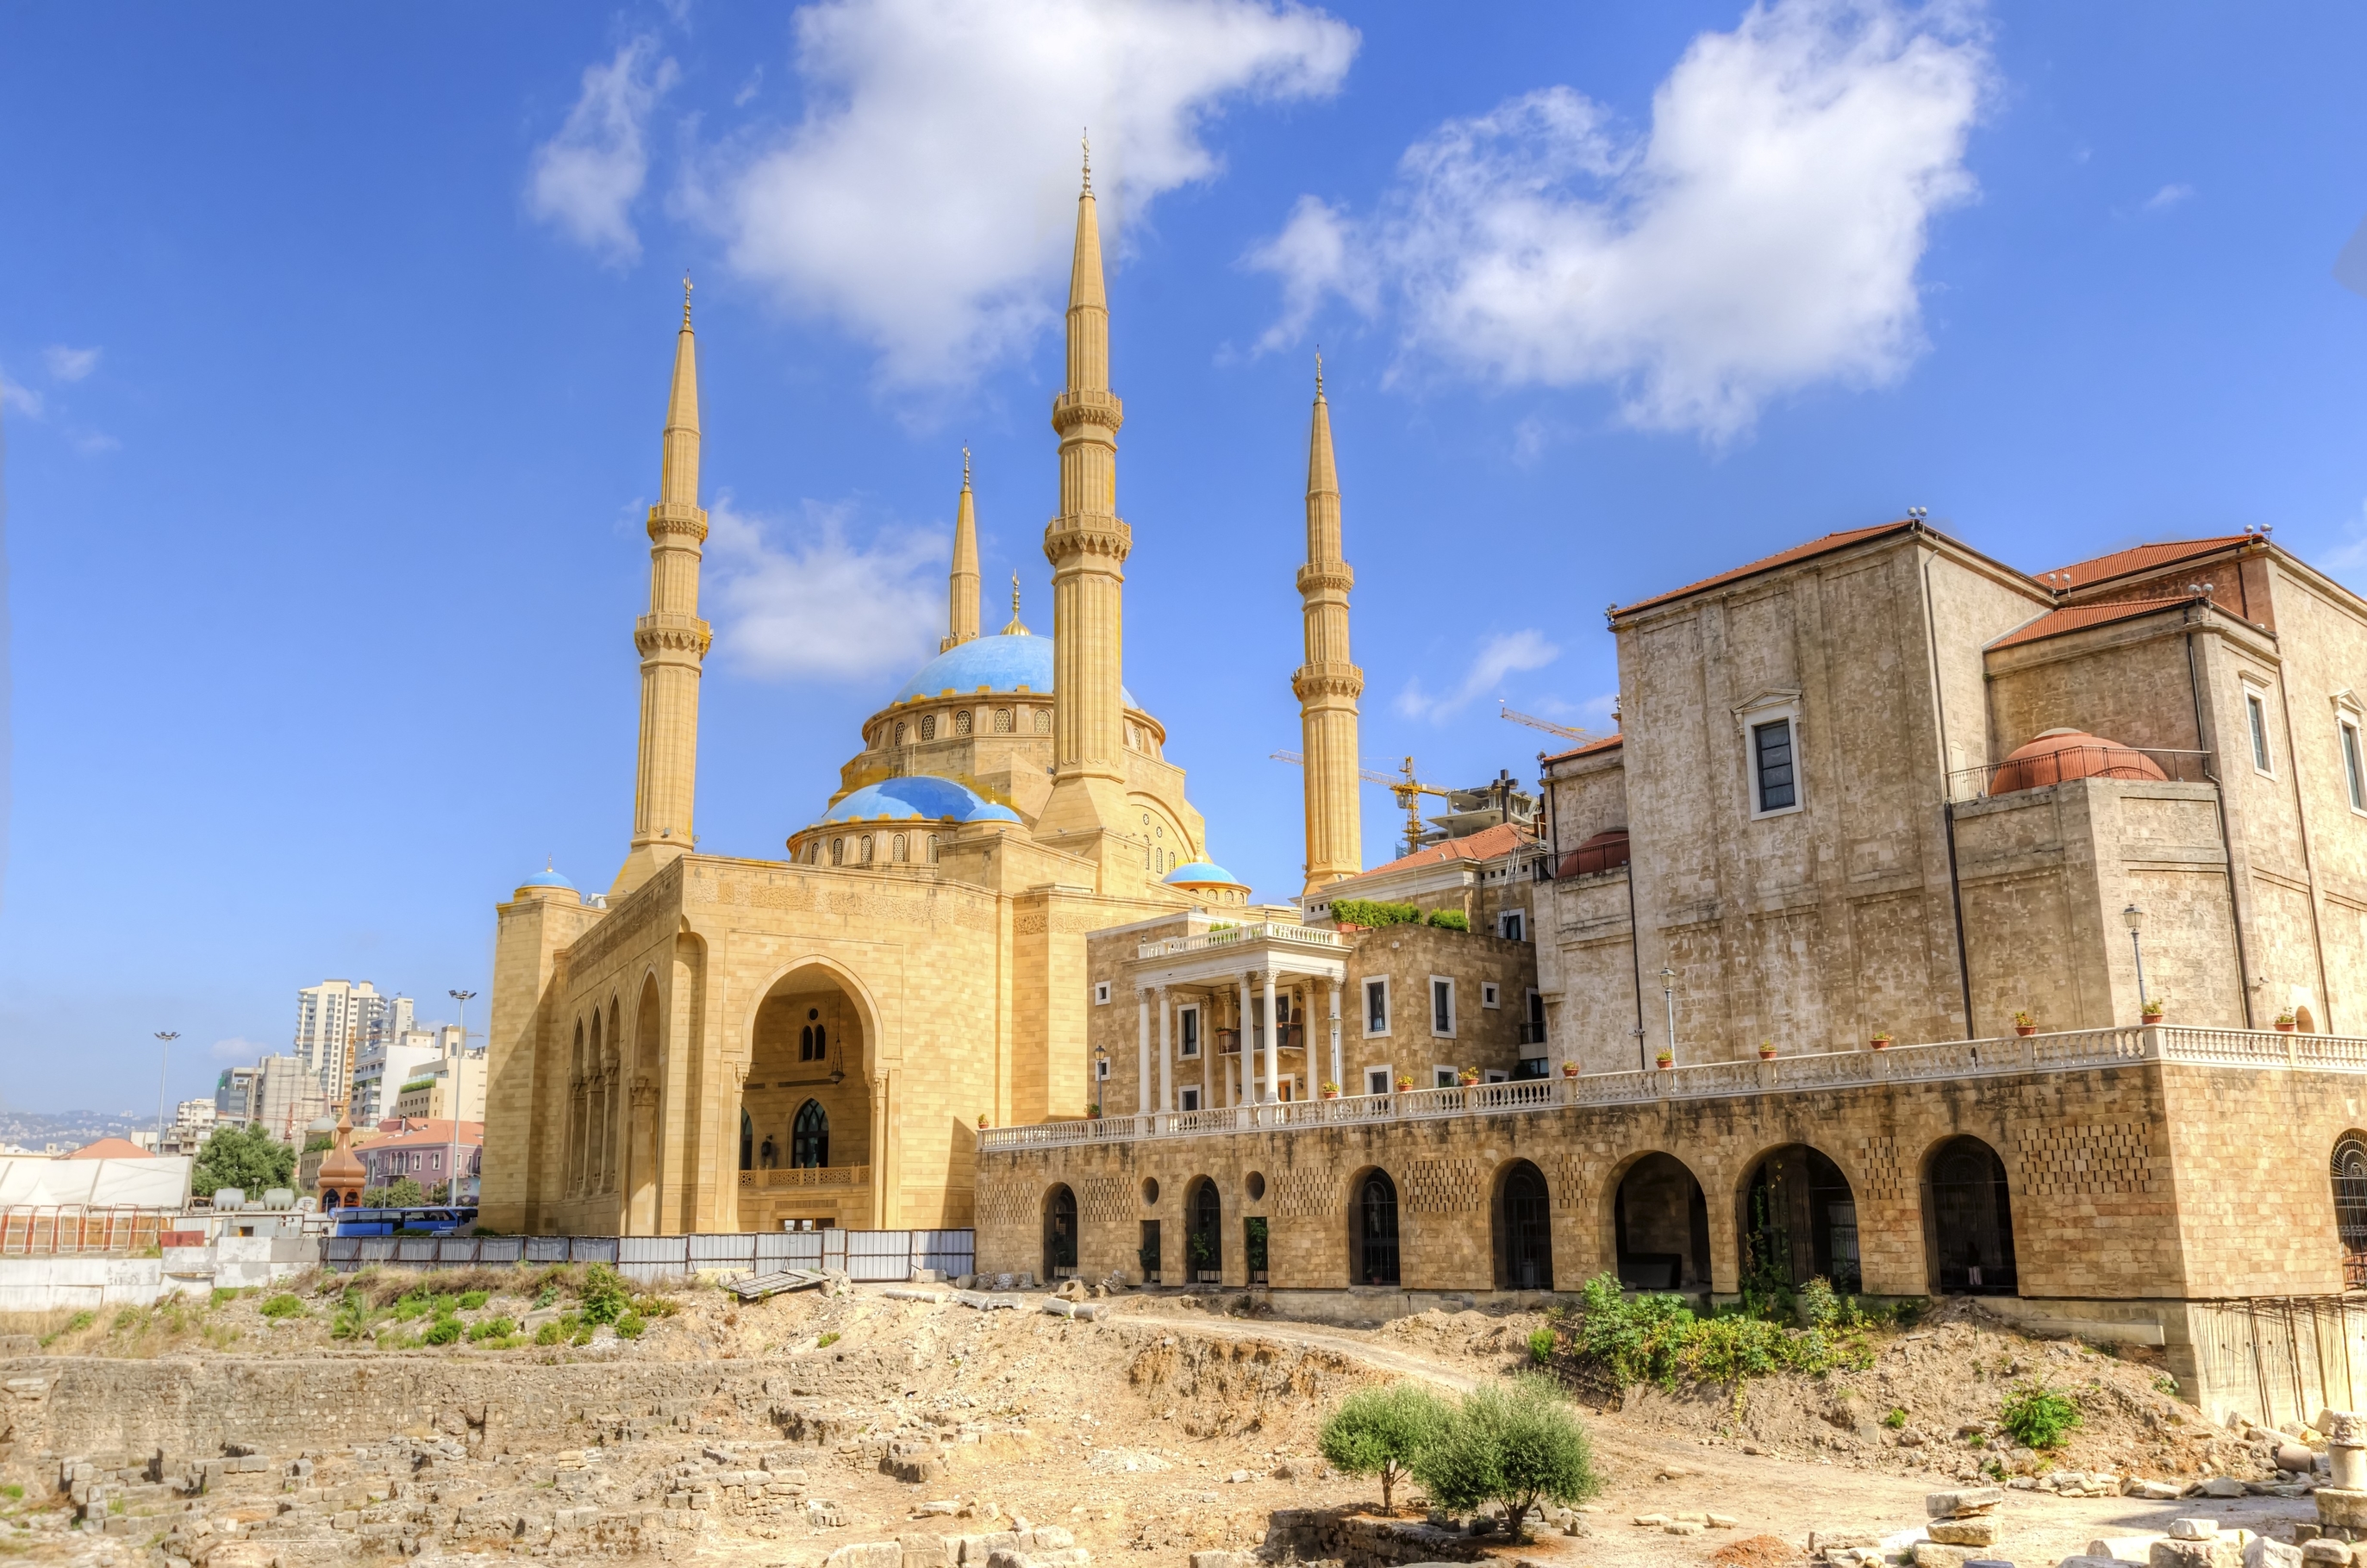 Image of a mosque in Lebanon